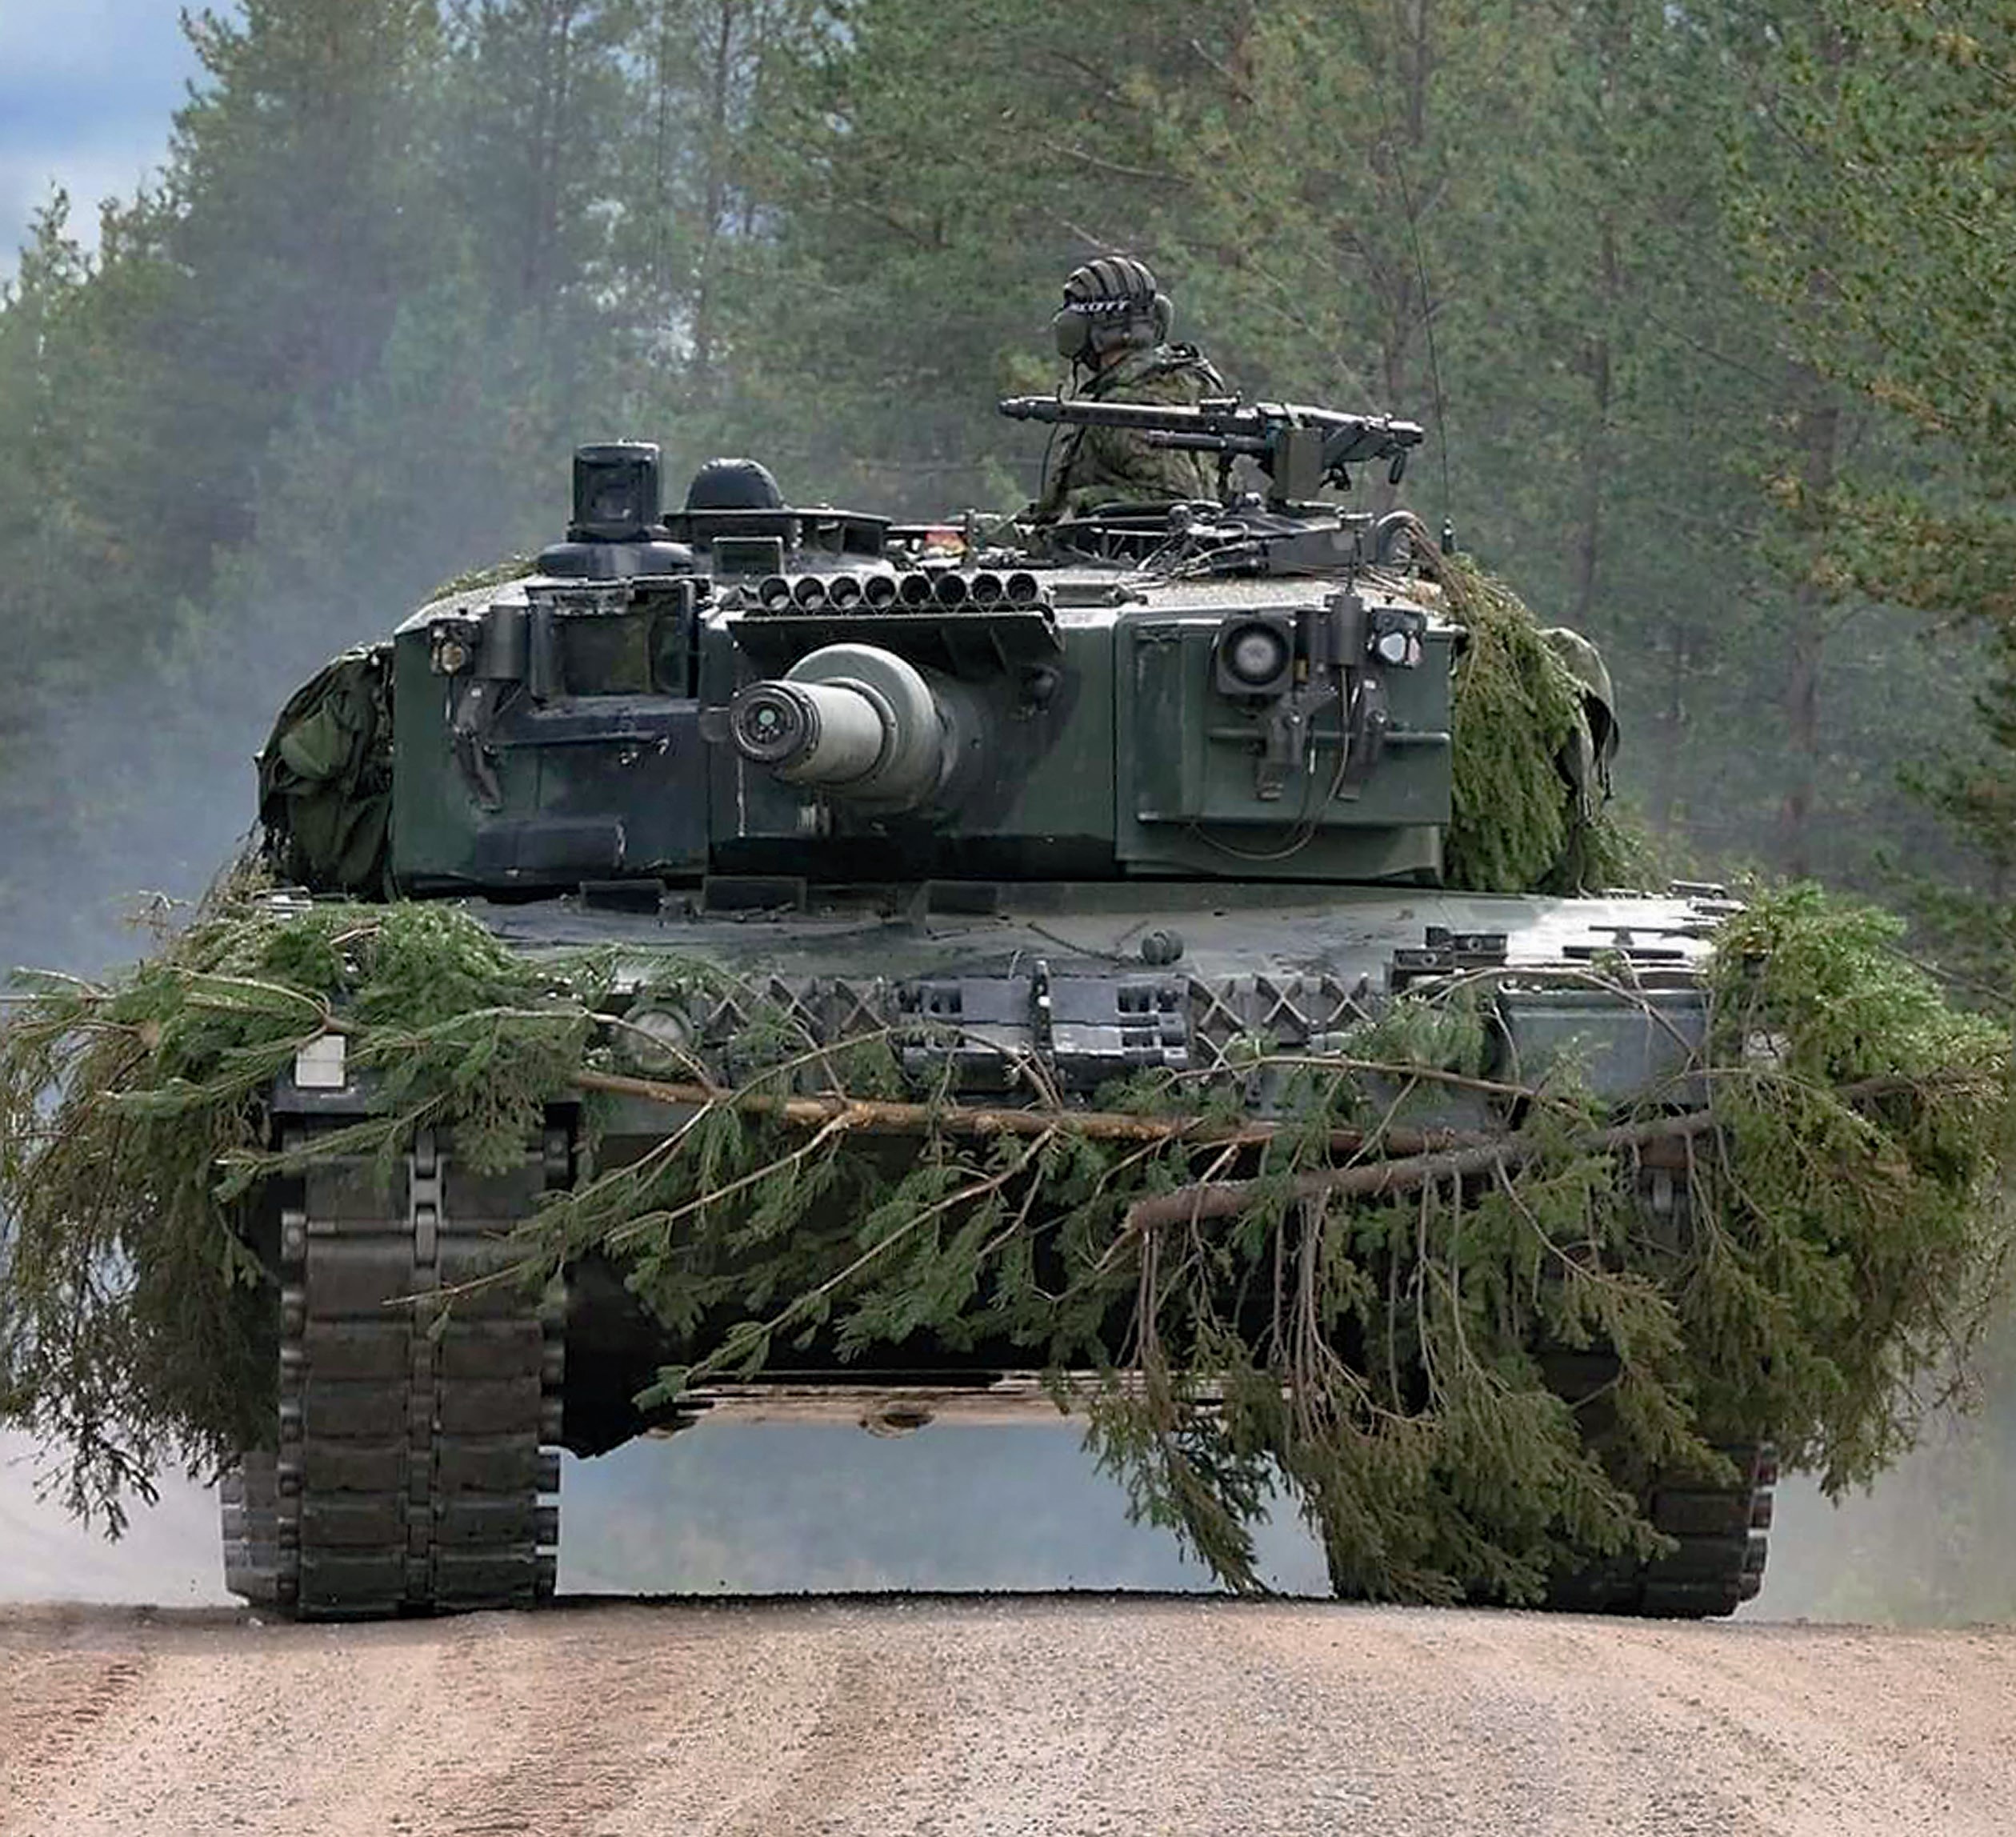 Accord Signed on Transfer of Leopard 2A4 MBTs to Ukraine - European Security & Defence